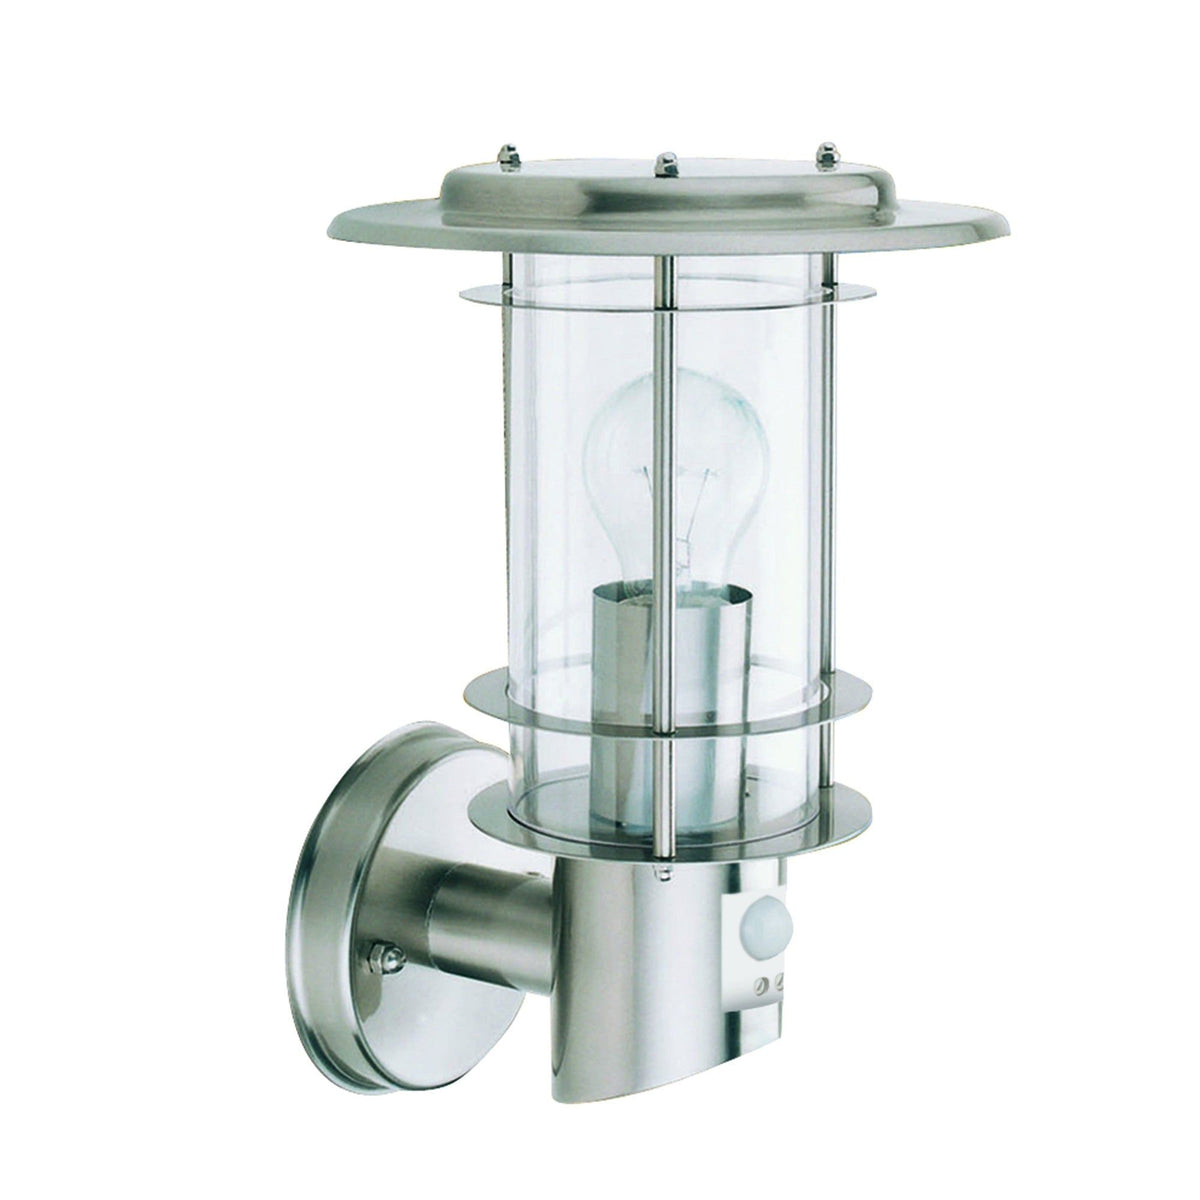 STAINLESS STEEL IP44 OUTDOOR LIGHT MOTION SENSOR, CLEAR POLYCARBONATE SHADE - Cusack Lighting